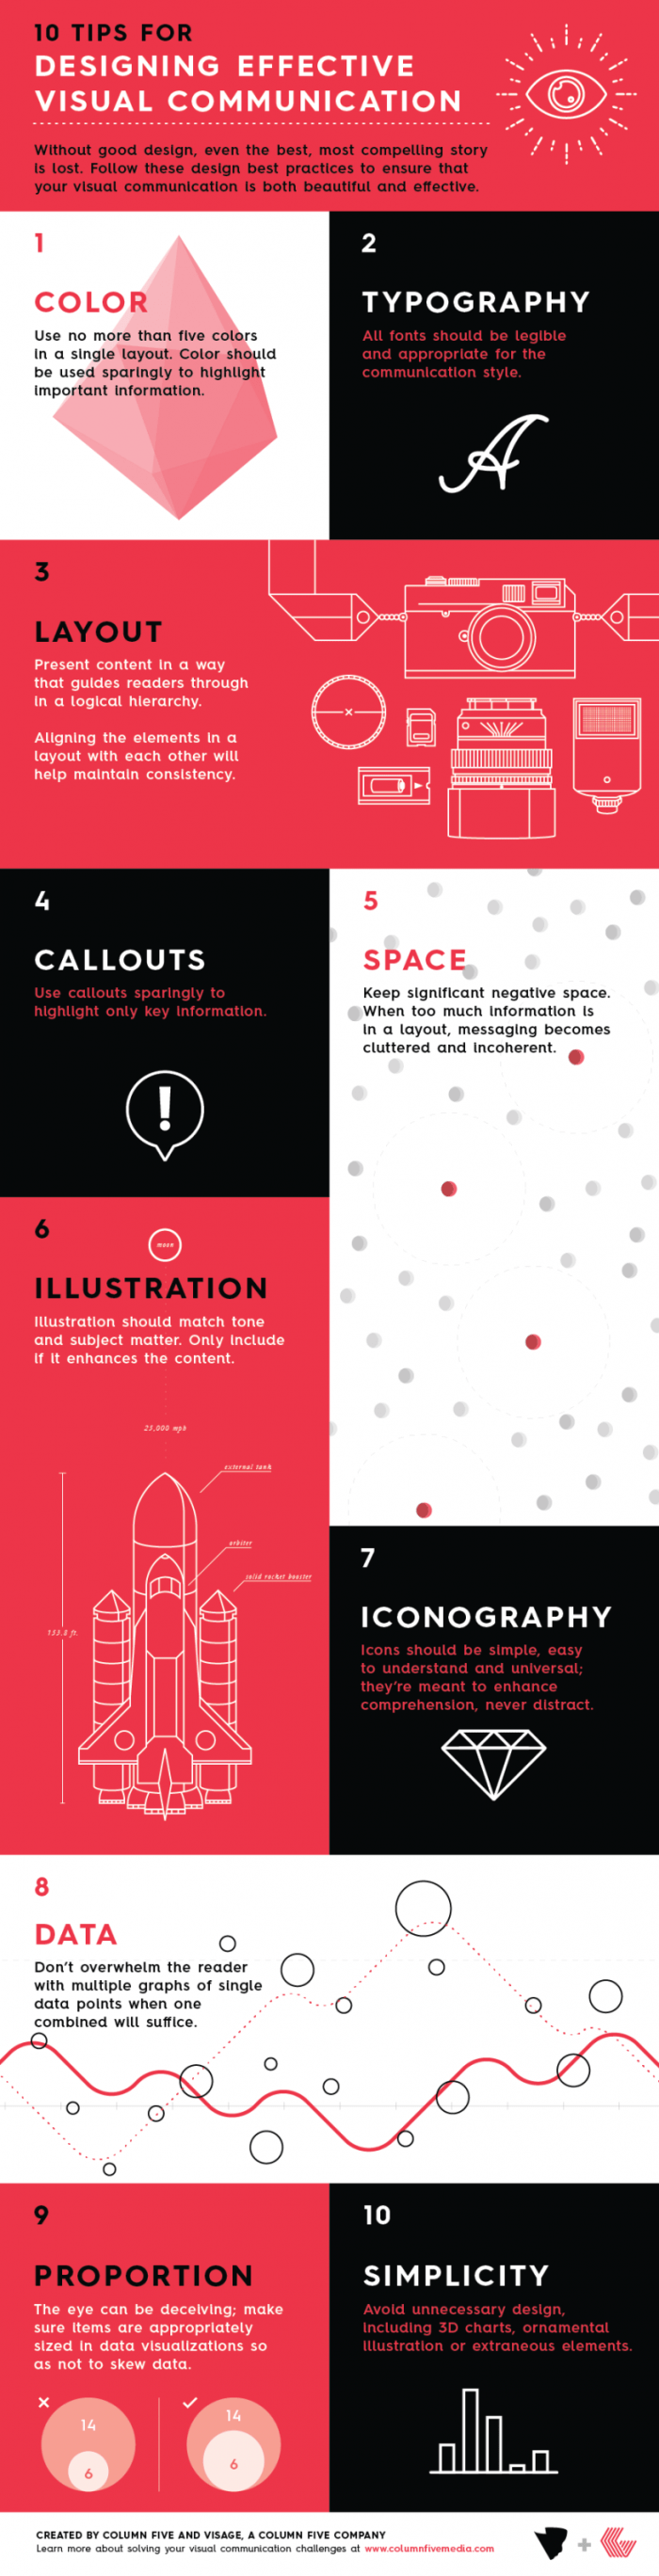 10 Tips for Good Design Infographic